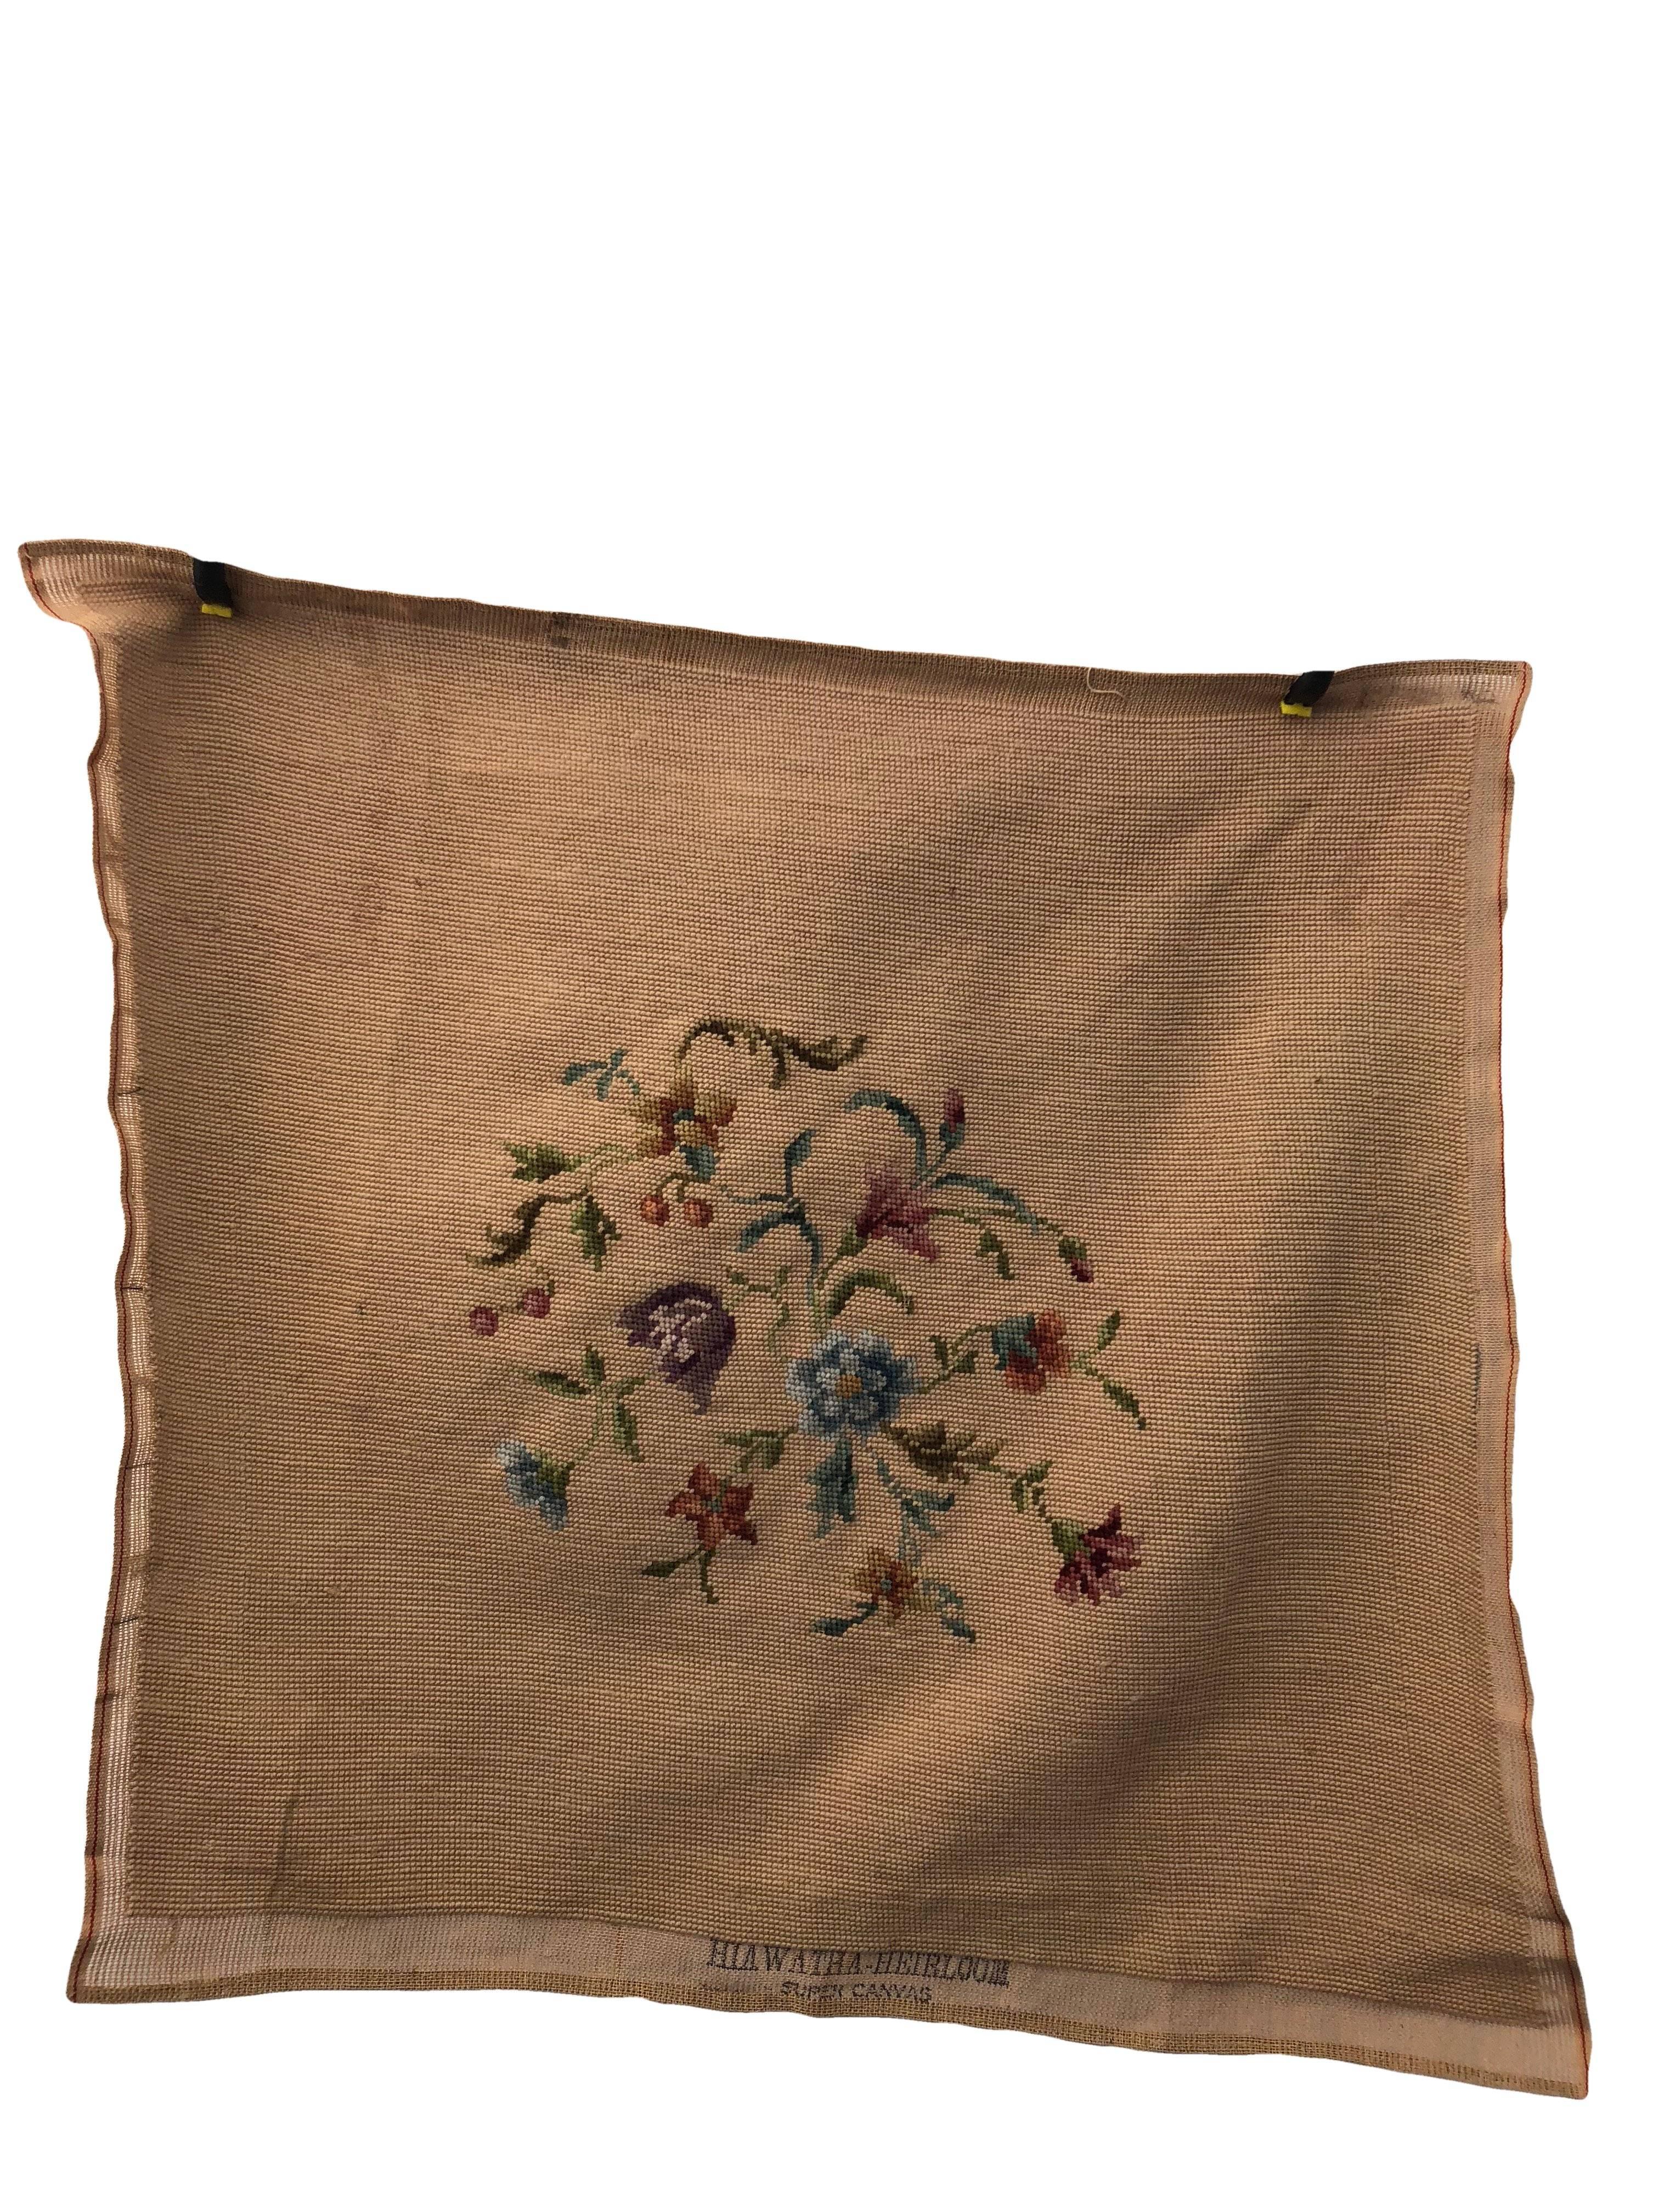 20th Century Antique French Needlepoint Pillow or Chair Covers, Floral Designs, Set of 3 For Sale